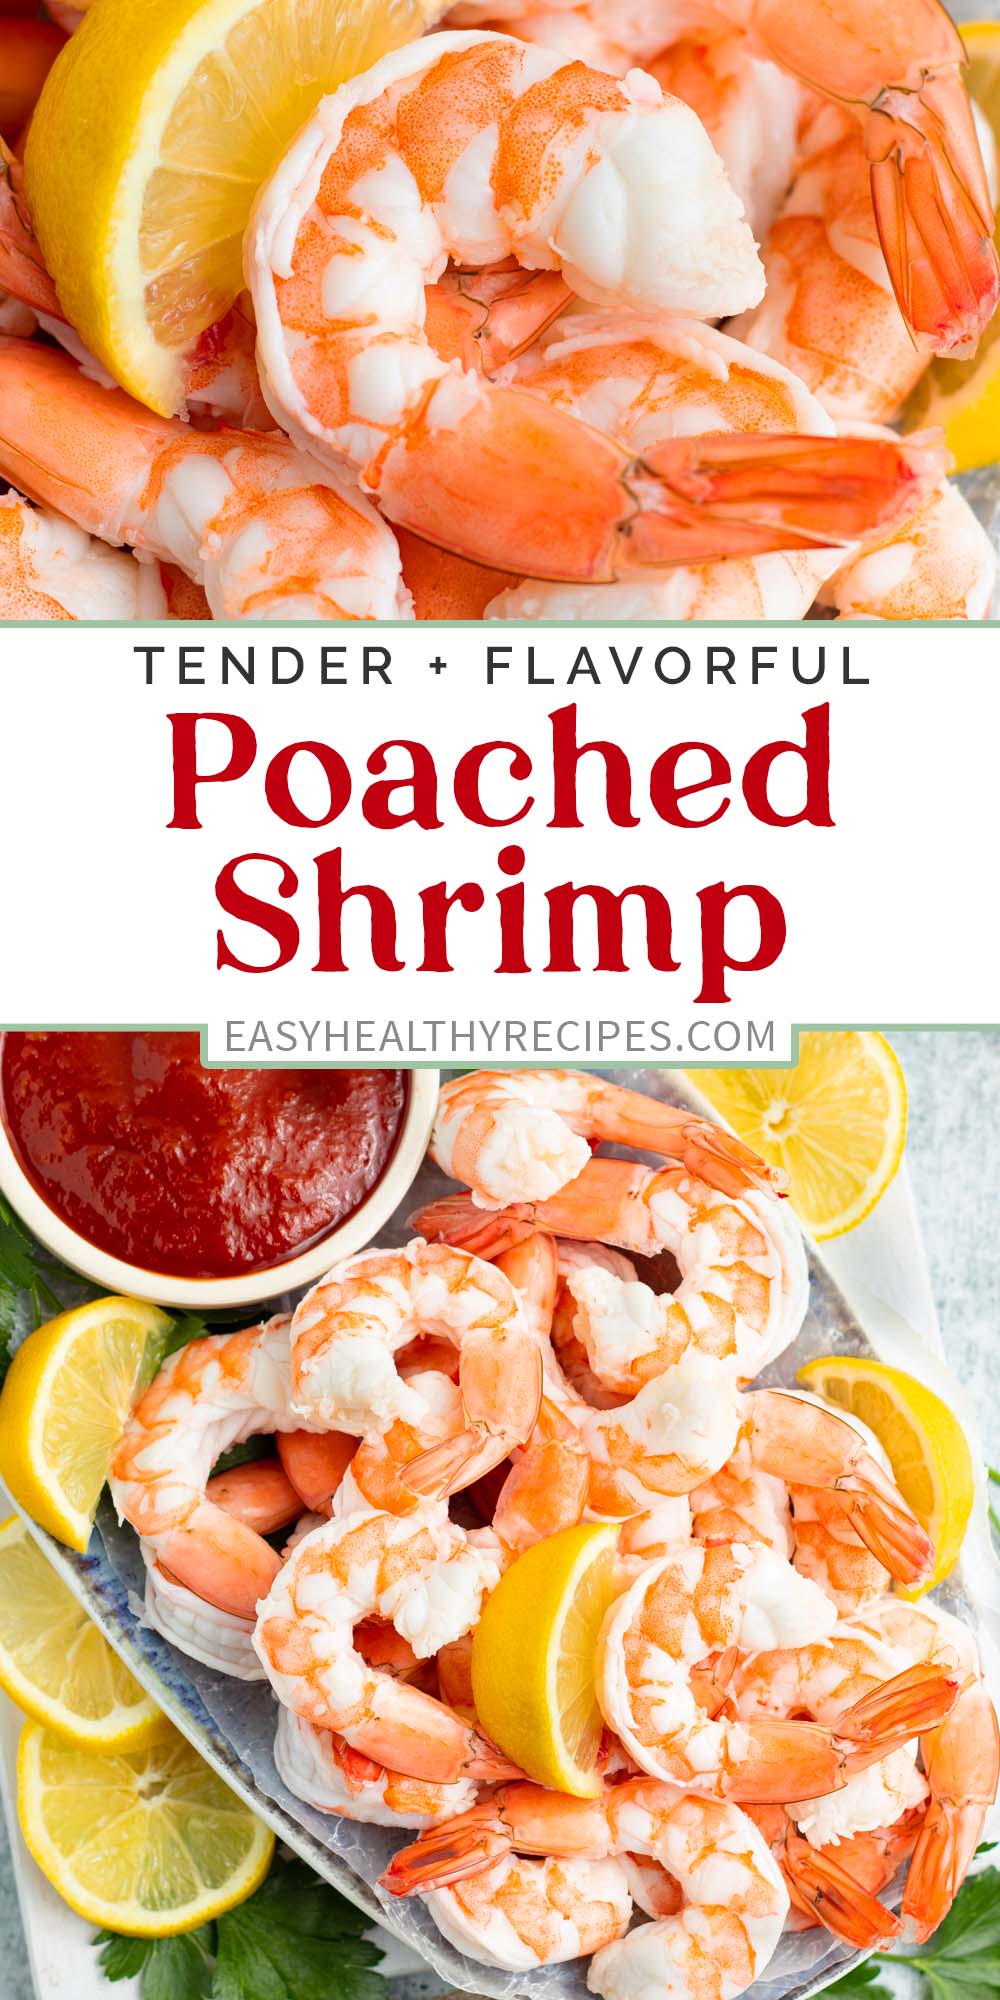 Pin graphic for poached shrimp.